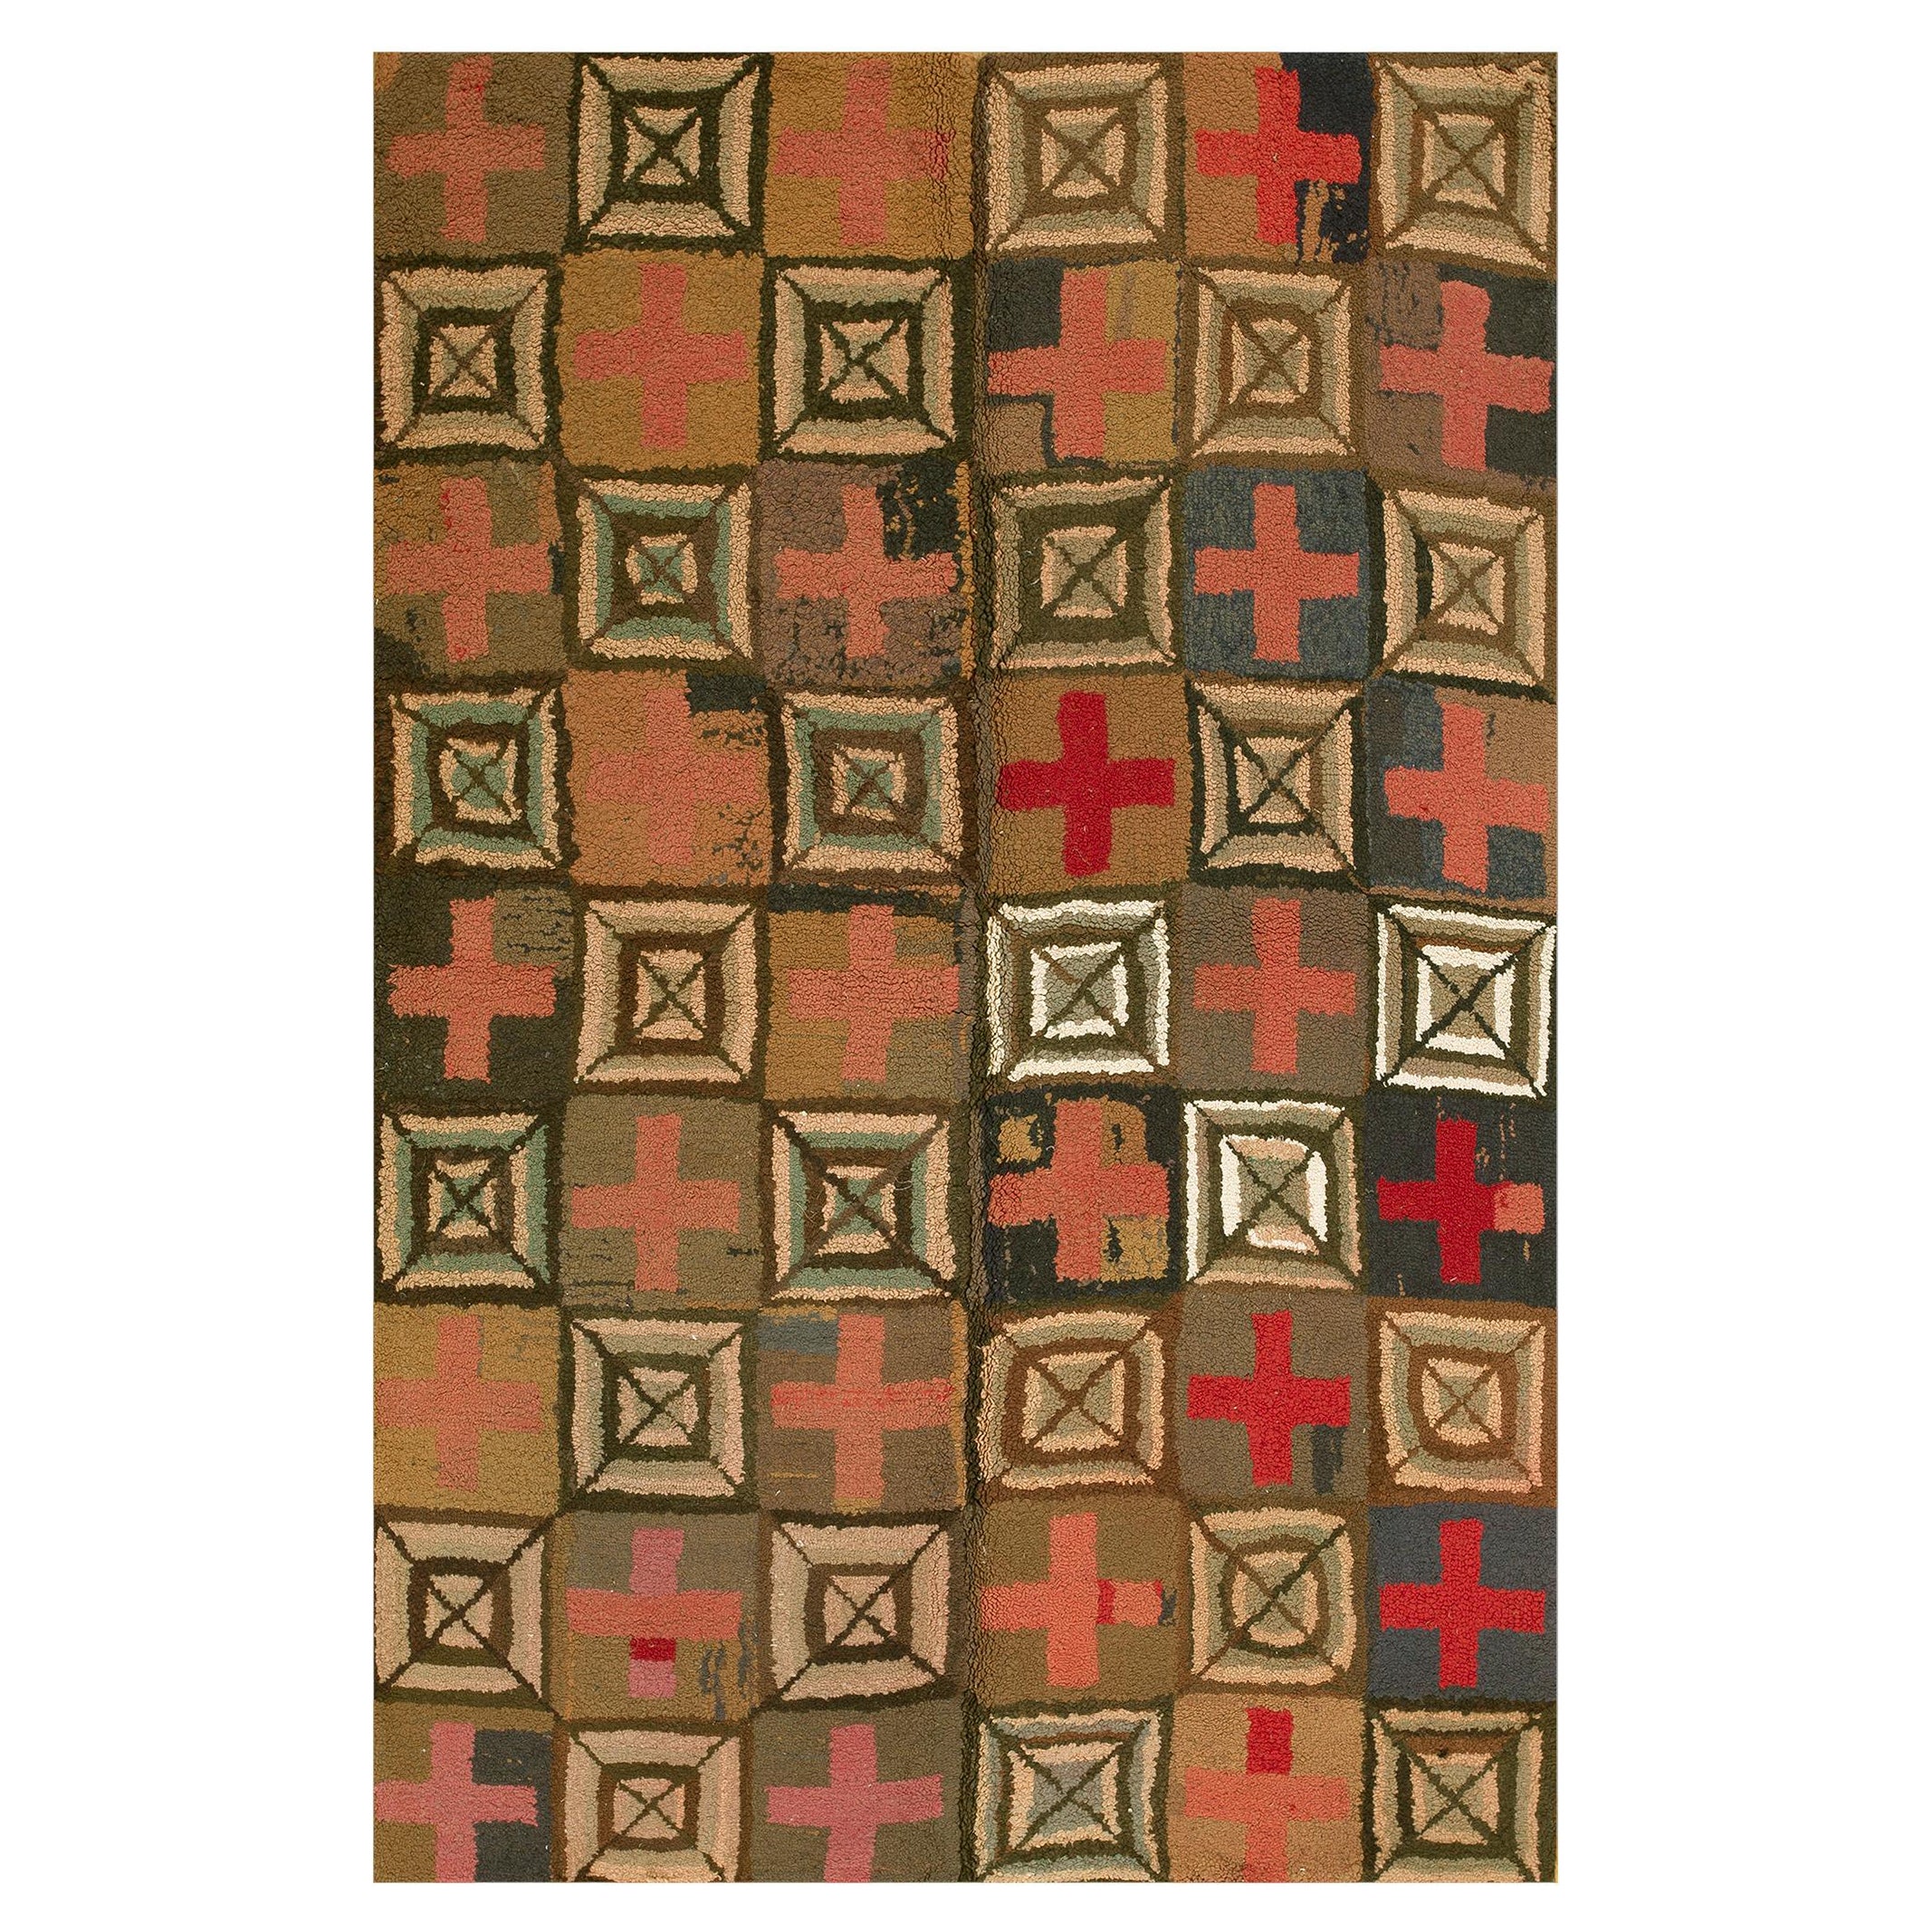 Mid 20th Century American Hooked Rug ( 5' 10" x 8' 4" - 180 x 255 cm ) For Sale